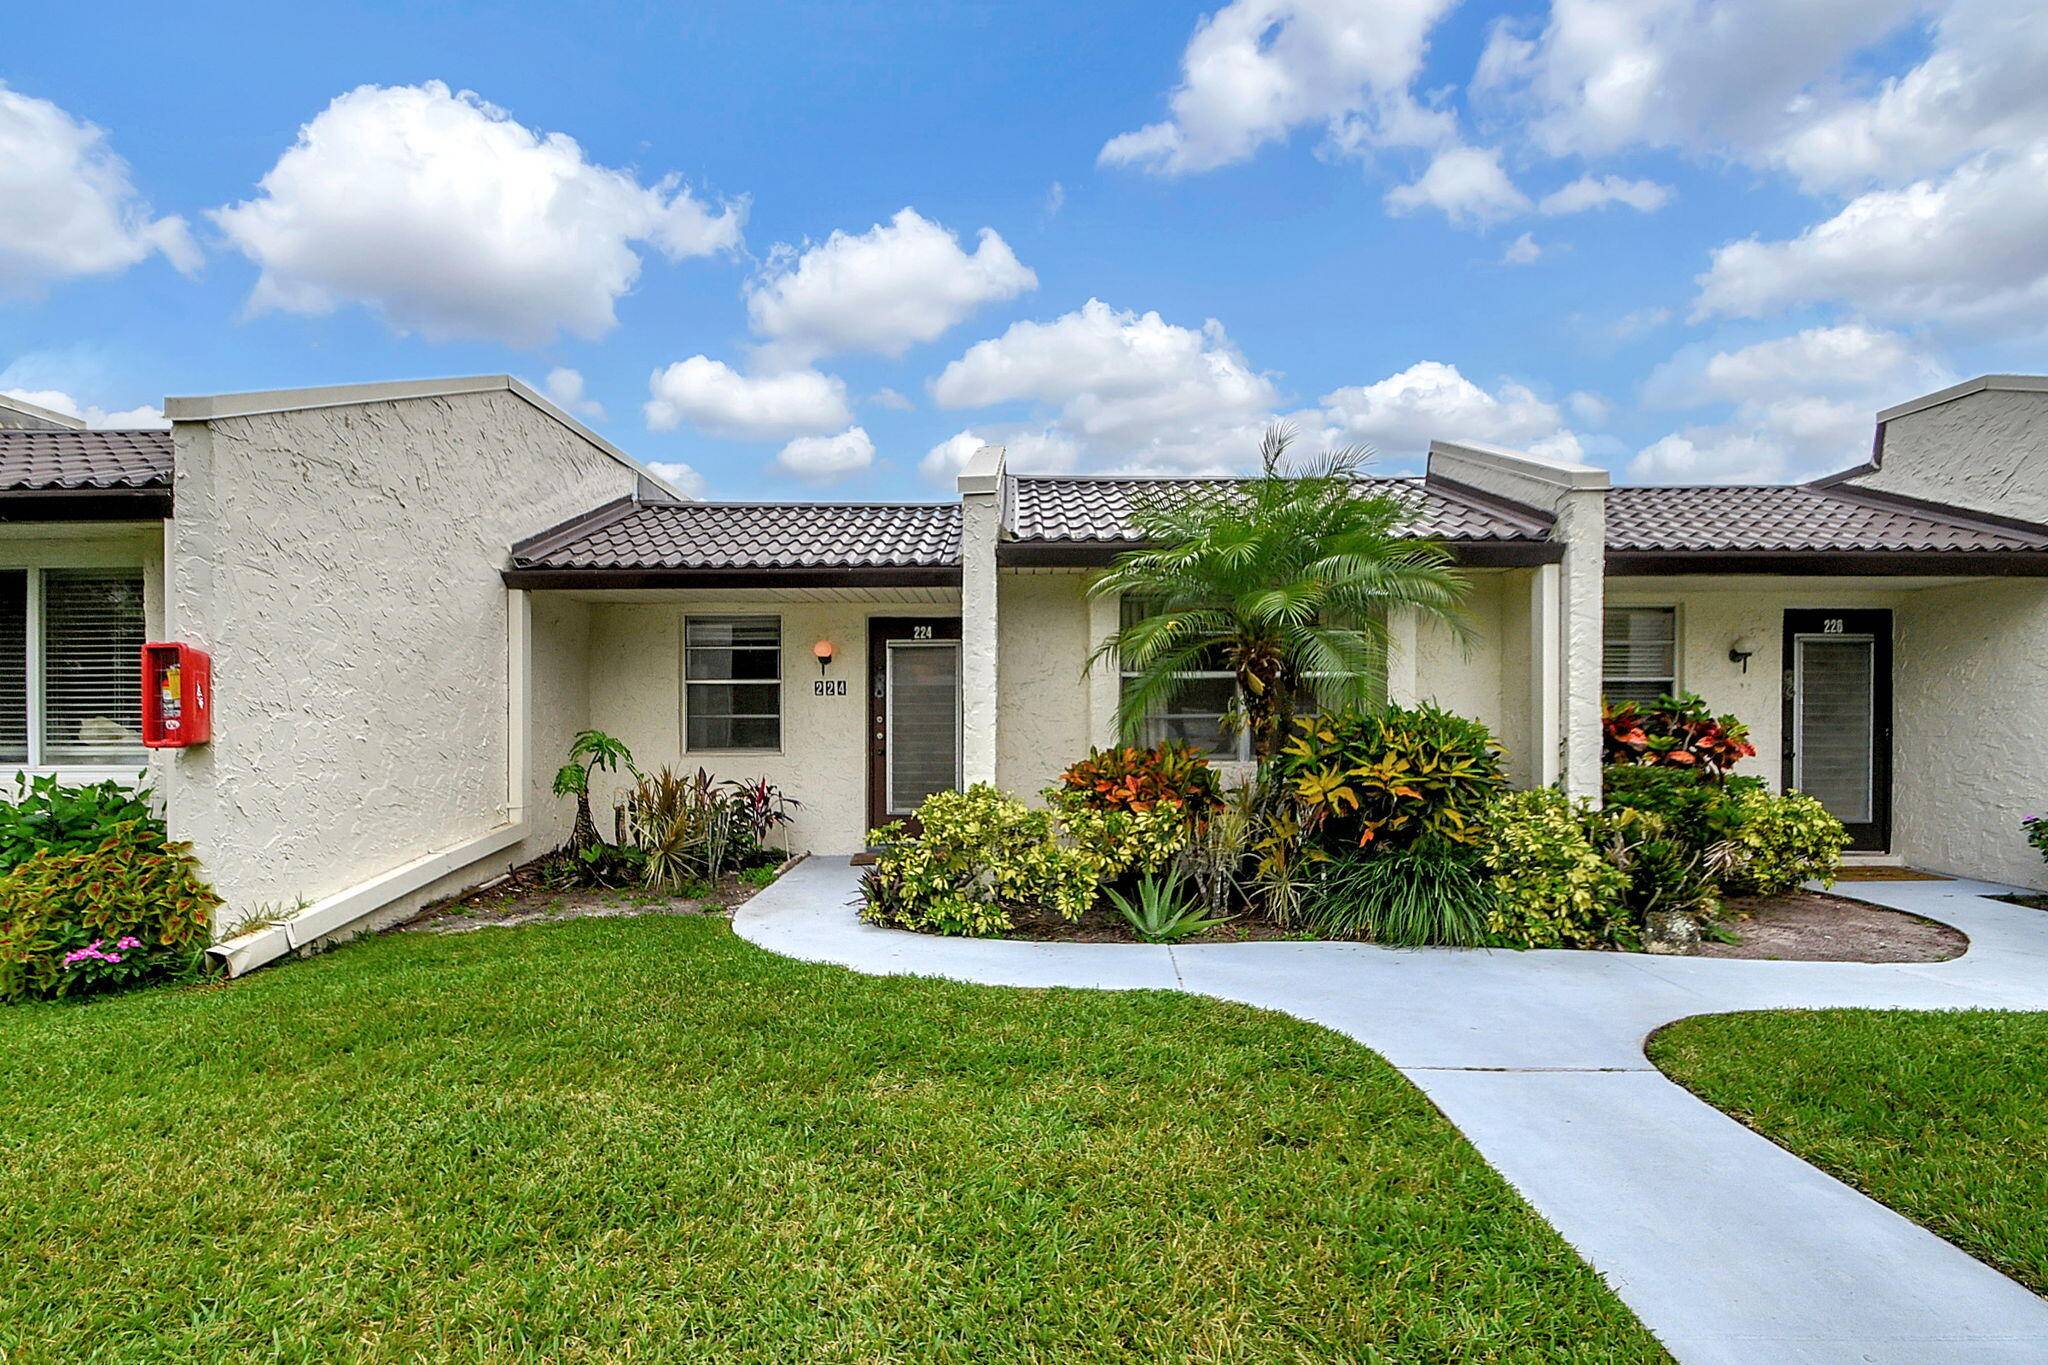 Nestled in the vibrant 55 community of Golden Lakes Village, this charming 2 bed, 2 bath villa in WPB offers convenience and leisure.